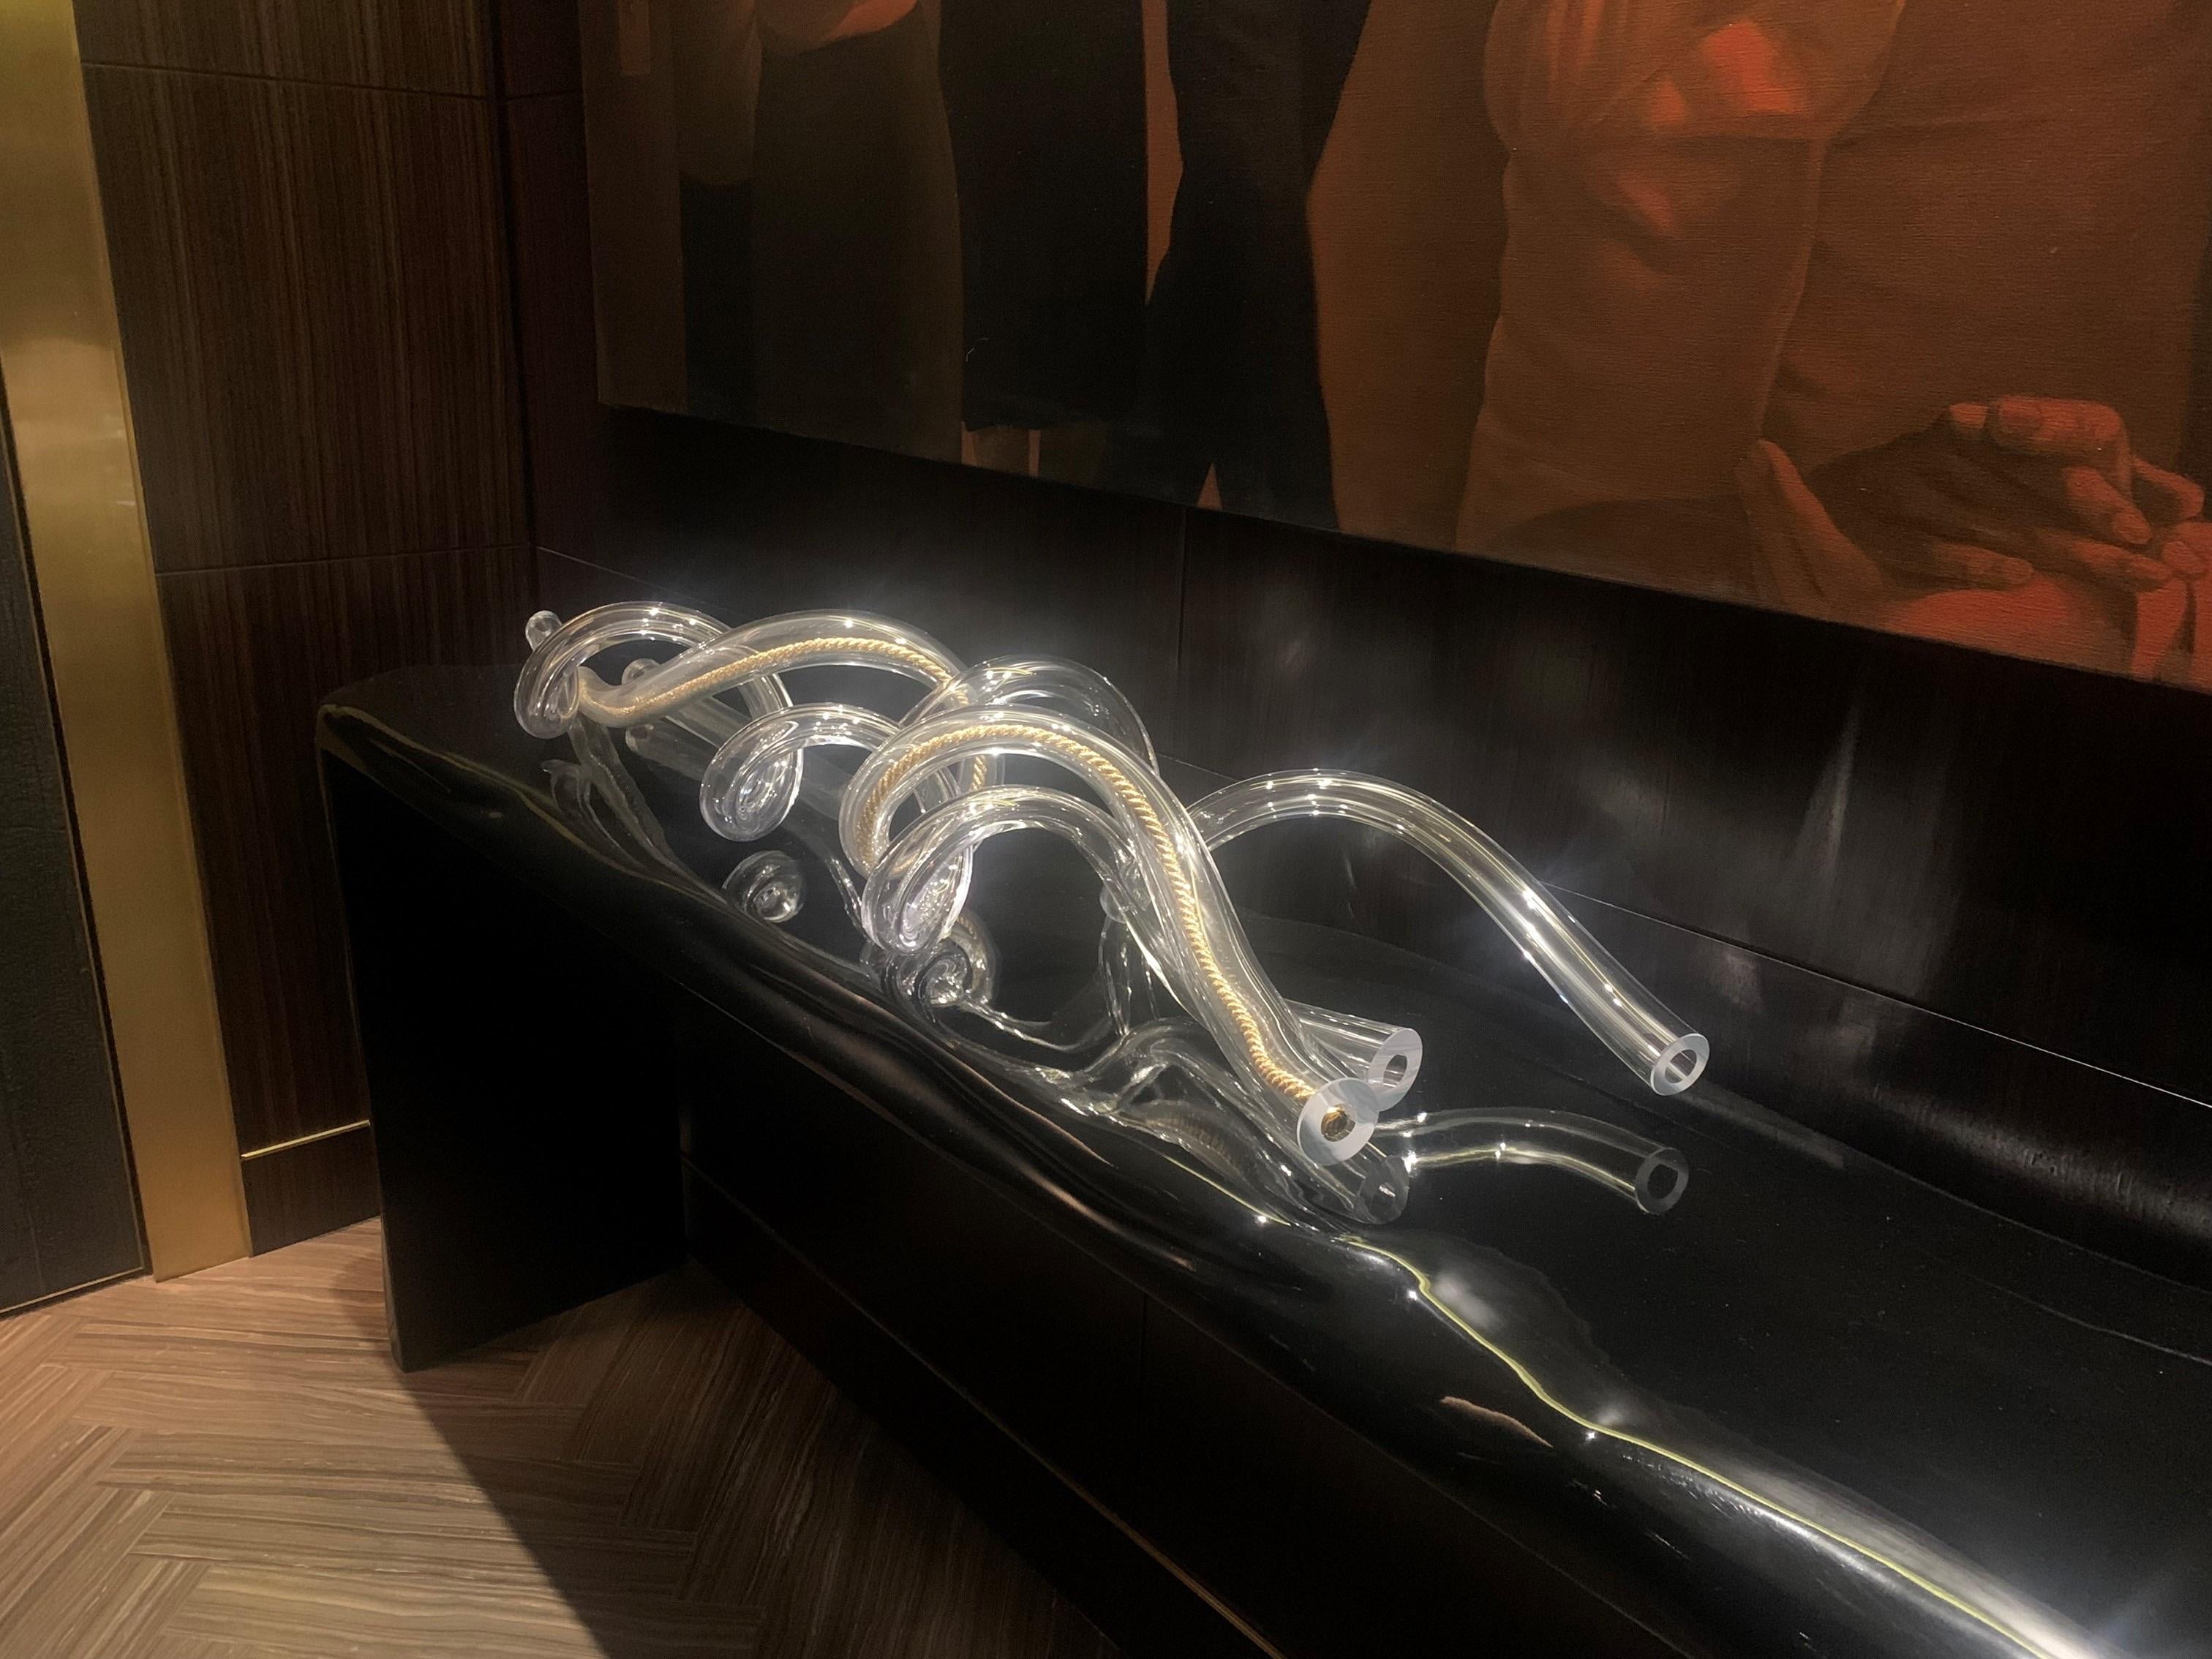 Offered is a long, coiled, transparent blown-glass sculpture that rests on a long console or as a table centerpiece and did not come with a stand. 

The sculpture is comprised of organically twisted tubes of handblown glass with cut and polished